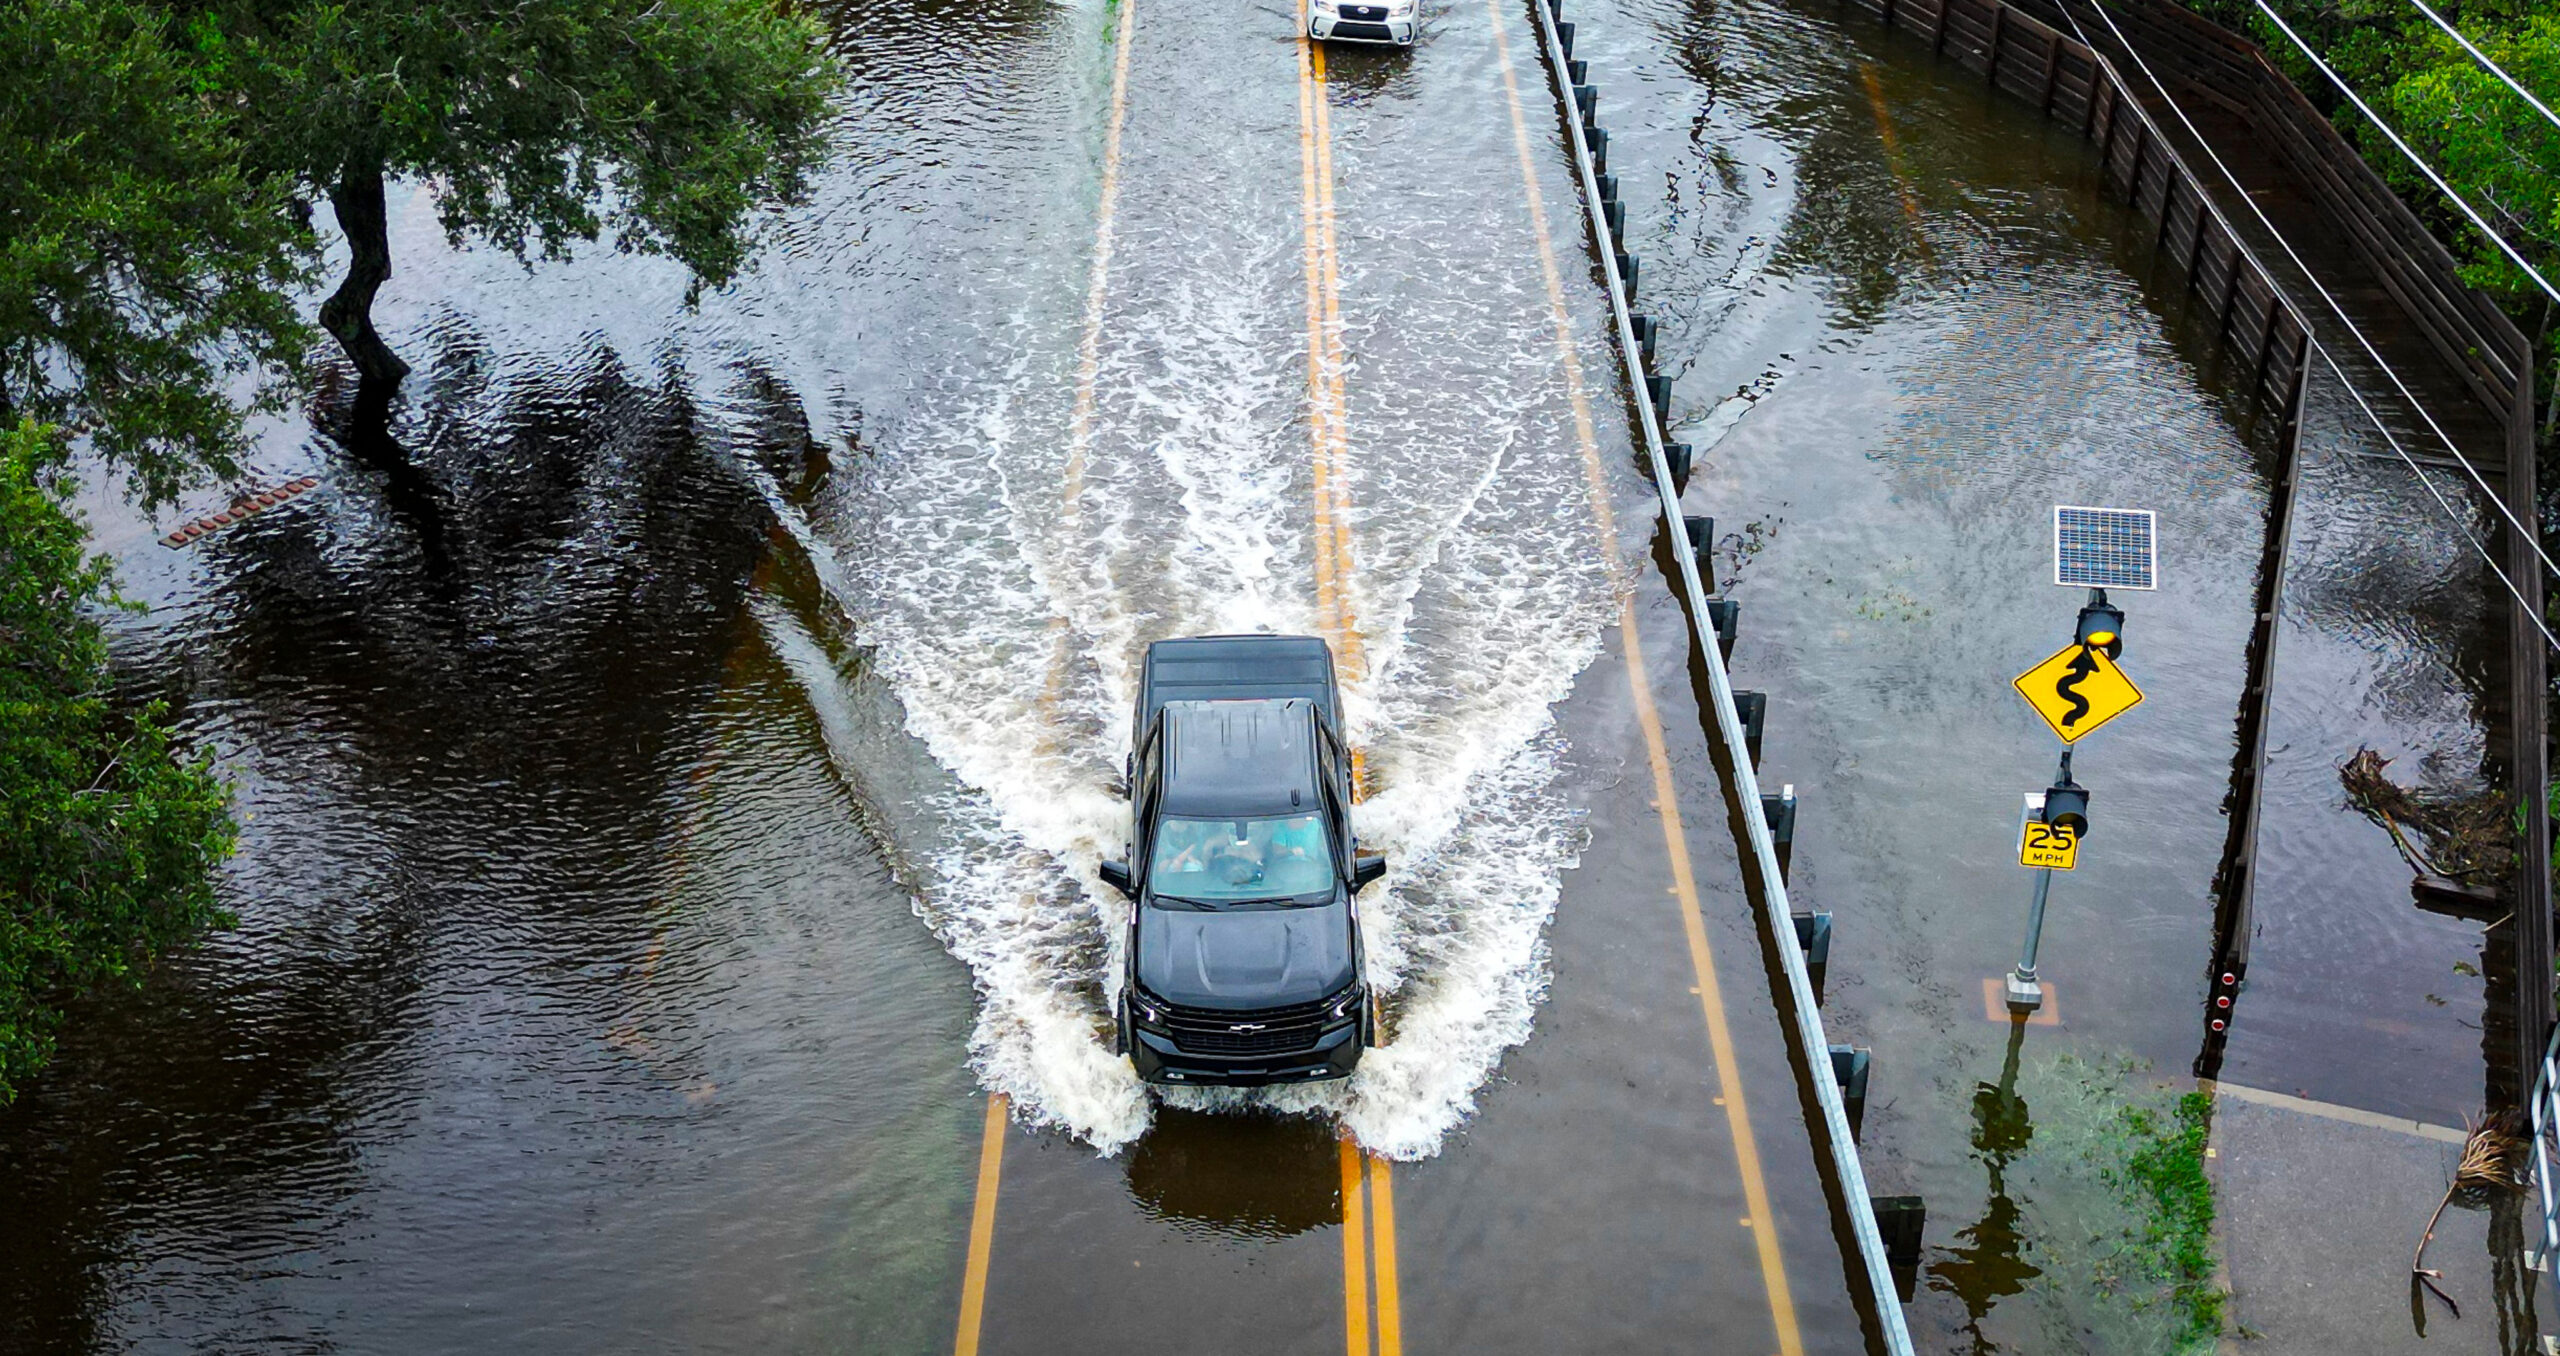 Hurricane Idalia, Florida. Respondents to a WEF survey listed extreme weather as the top risk most likely to present a material crisis on a global scale in 2024. (Photo: MIGUEL J. RODRIGUEZ CARRILLO/AFP via Getty Images) 